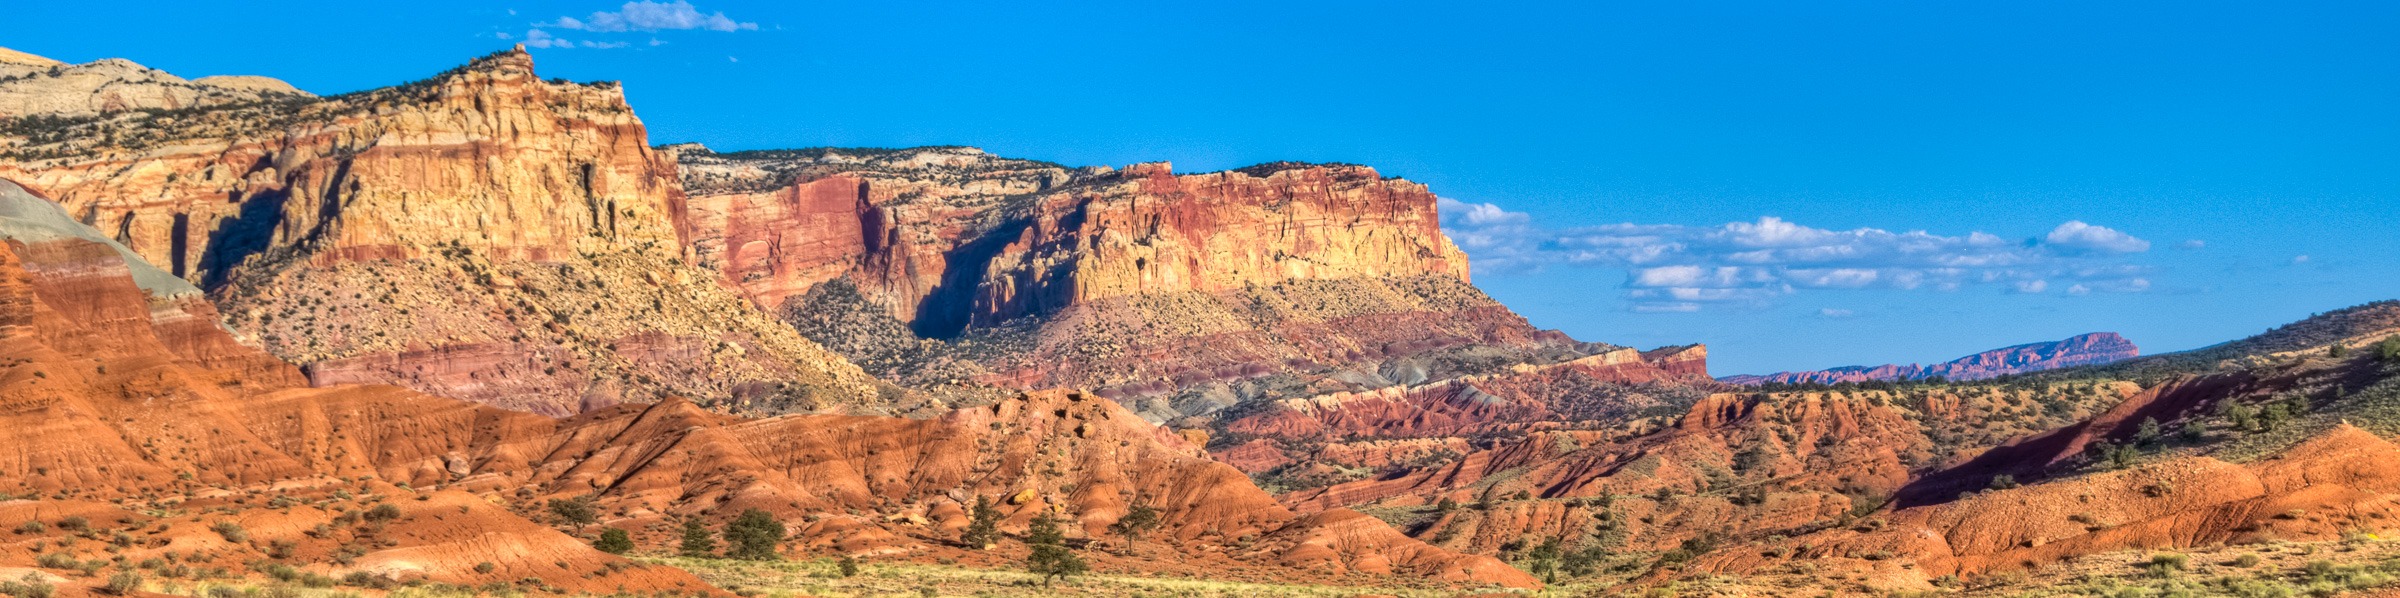 Cliff faces along Scenic Drive in Capitol Reef National Park.